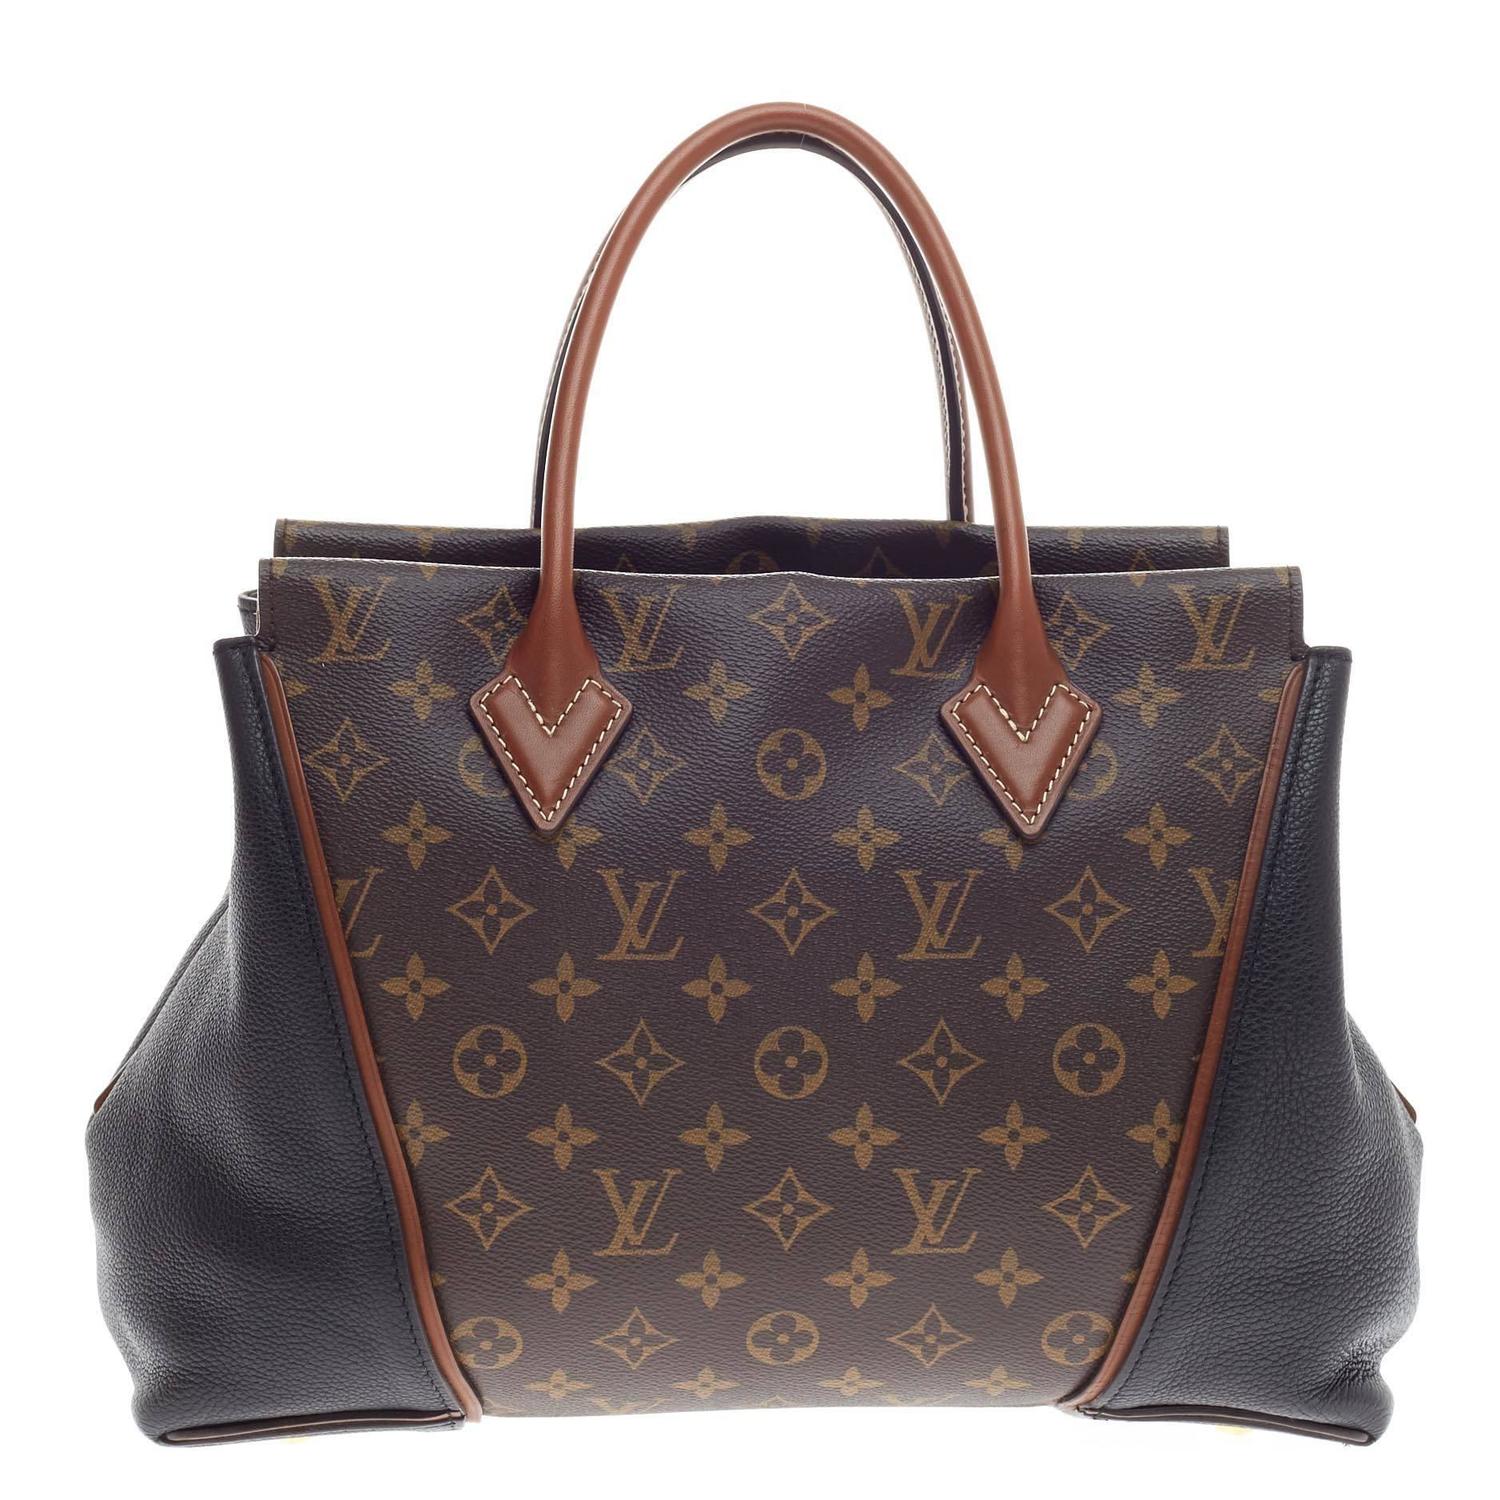 Louis Vuitton W Tote Monogram Canvas and Leather PM at 1stdibs